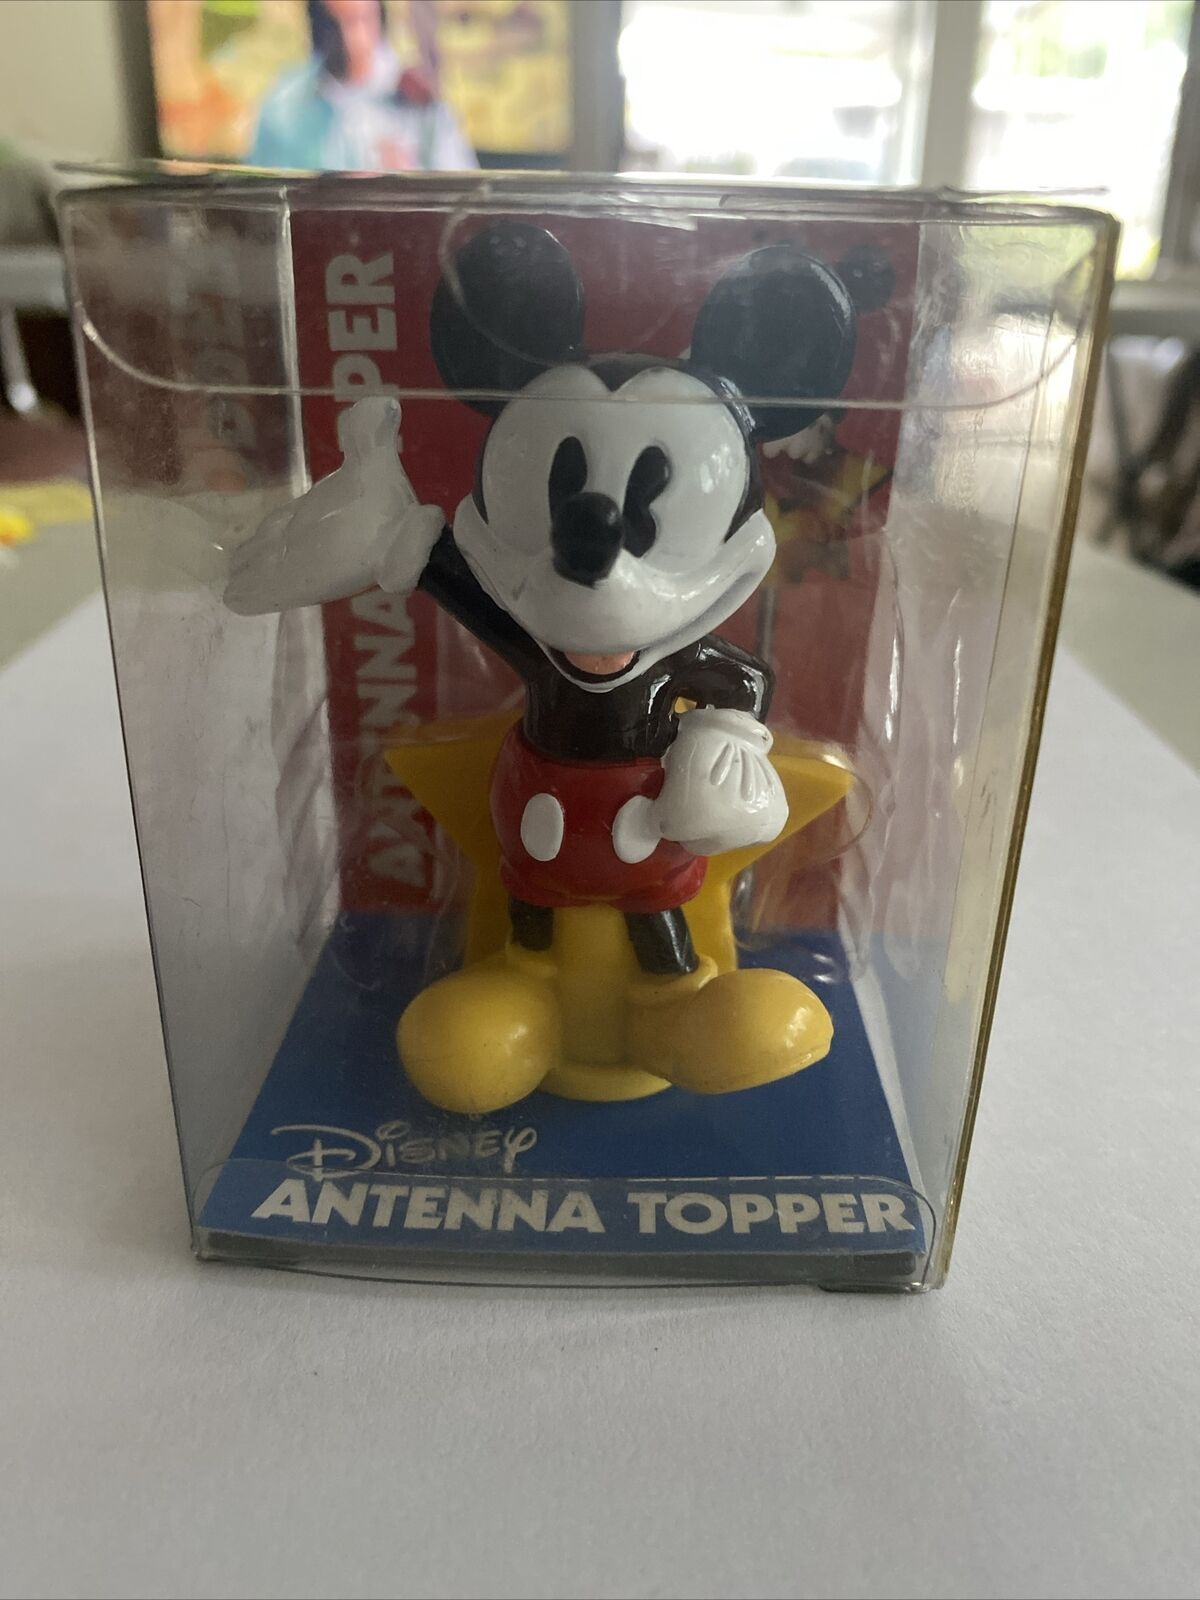 WDW Disney Mickey Mouse Antenna Topper Ornament